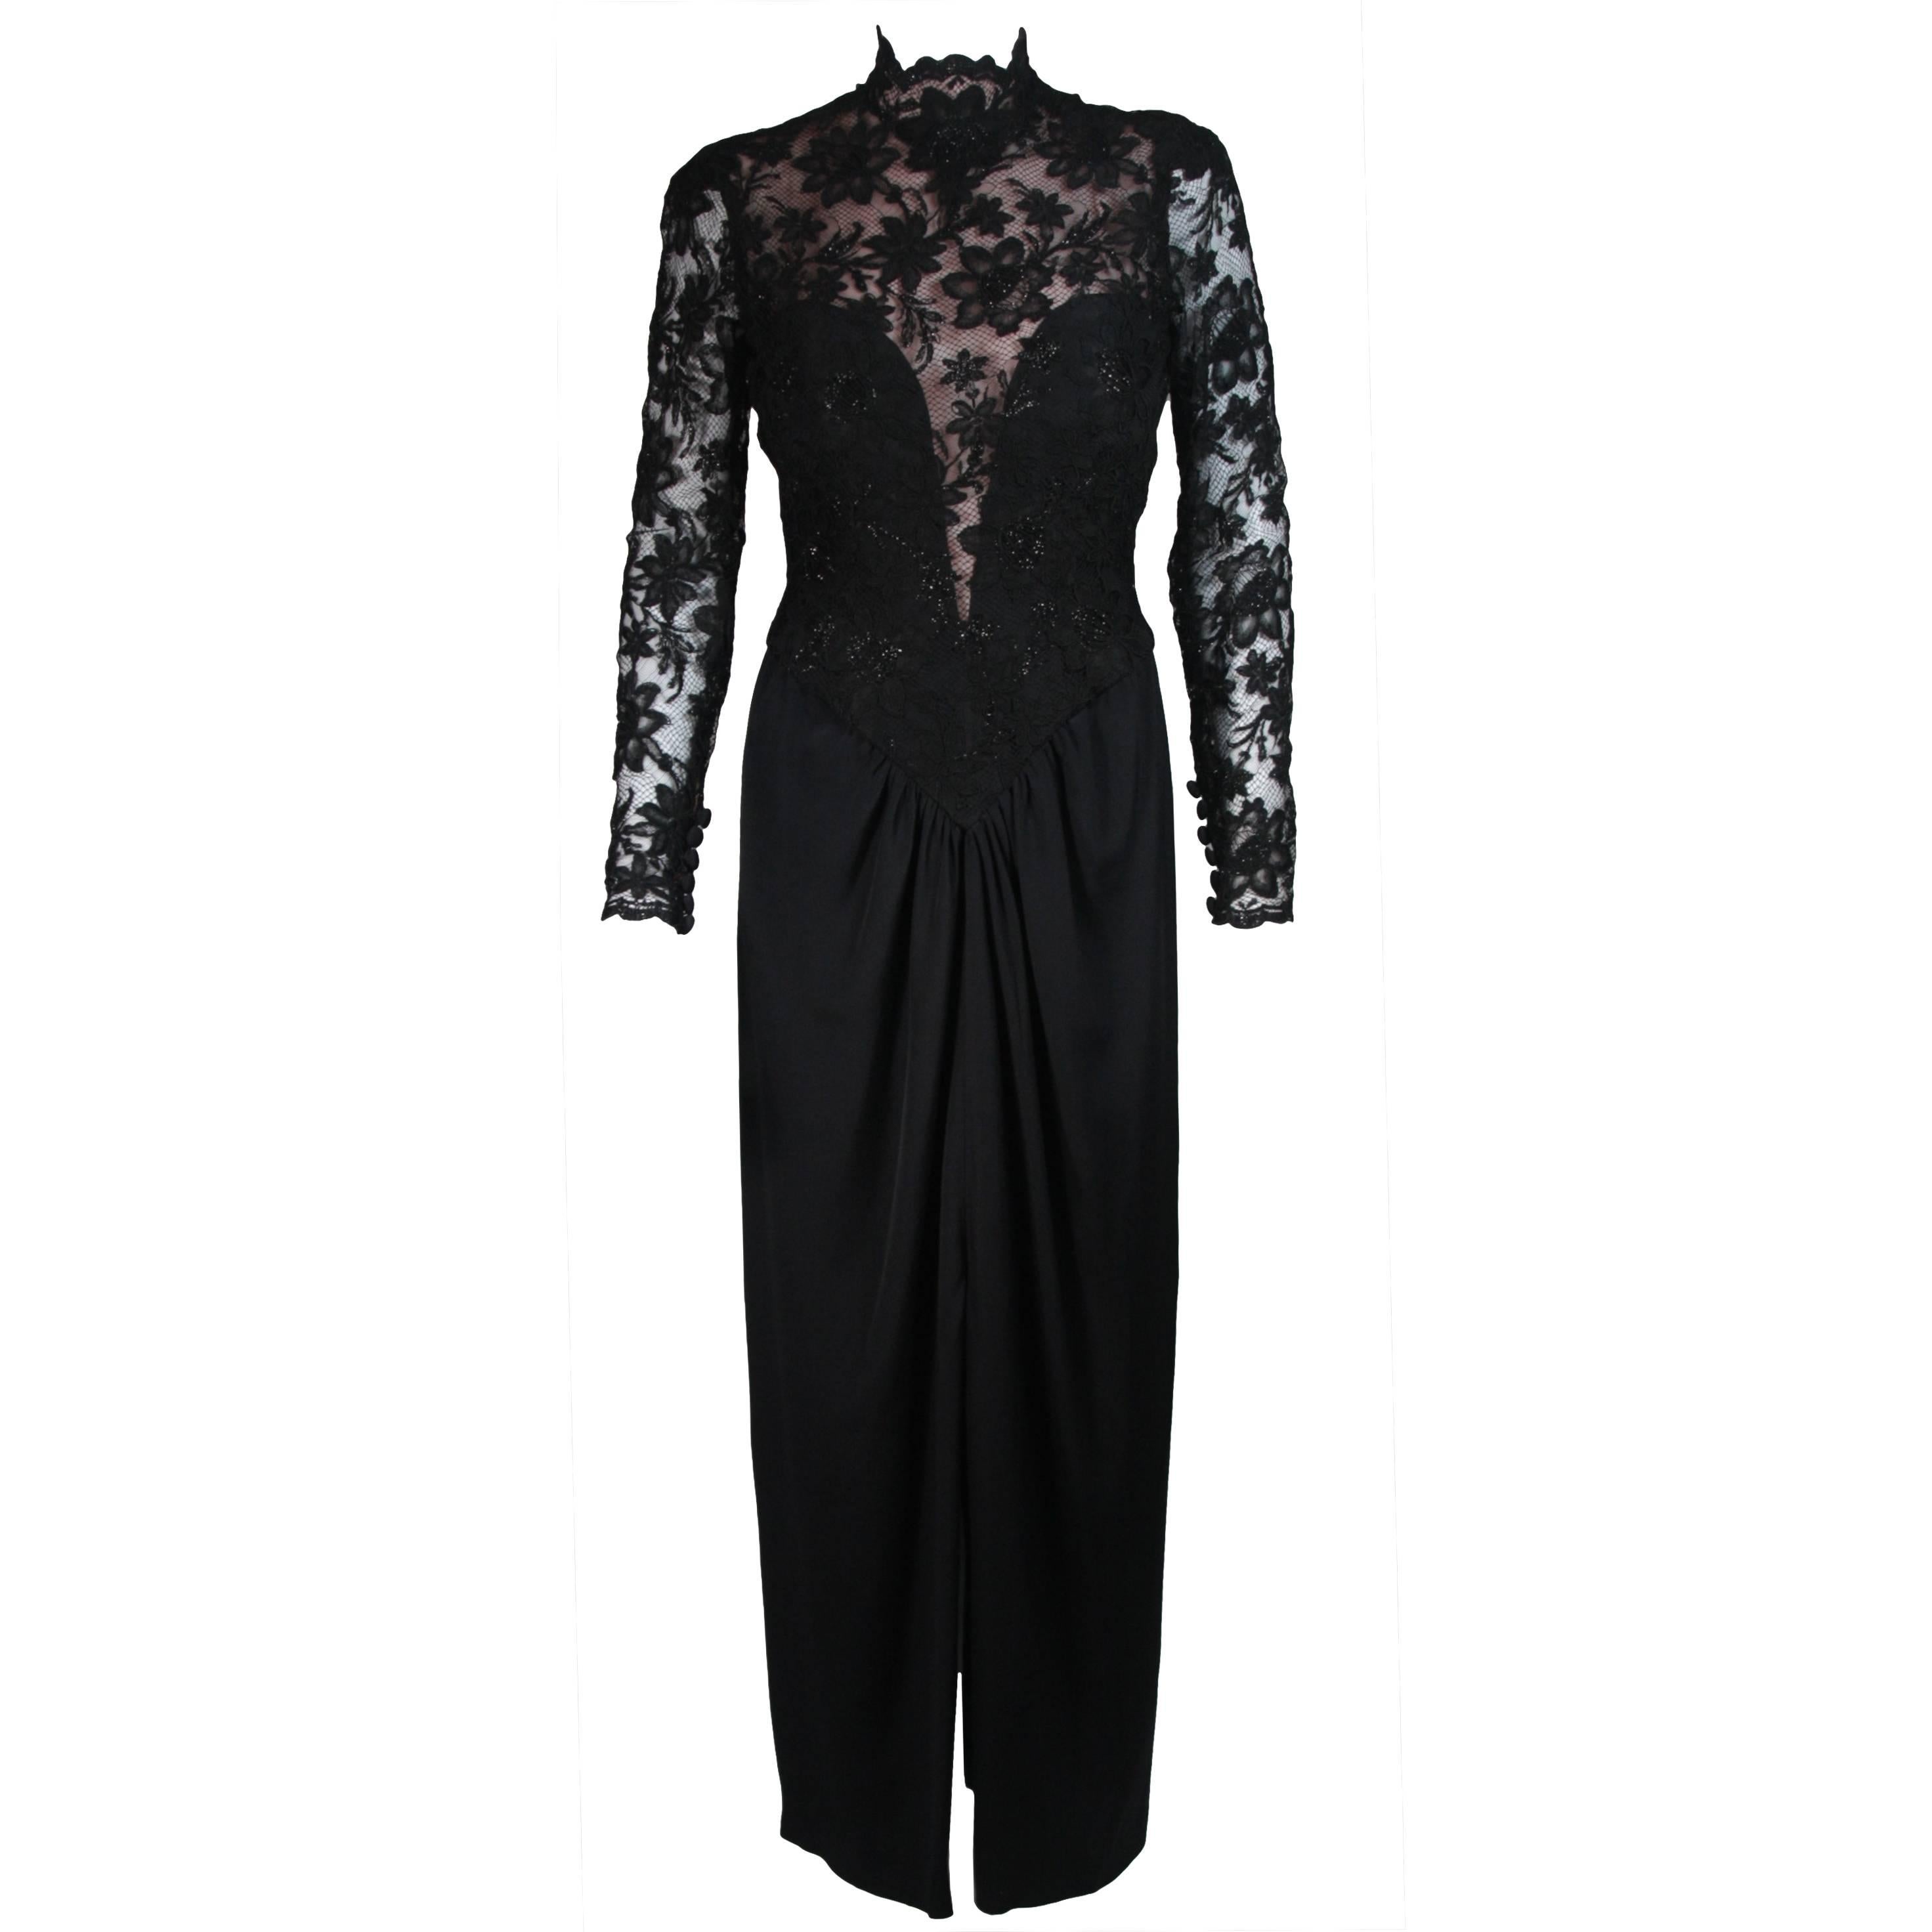 BOB MACKIE Black Lace Gown with Draped Jersey Size Small